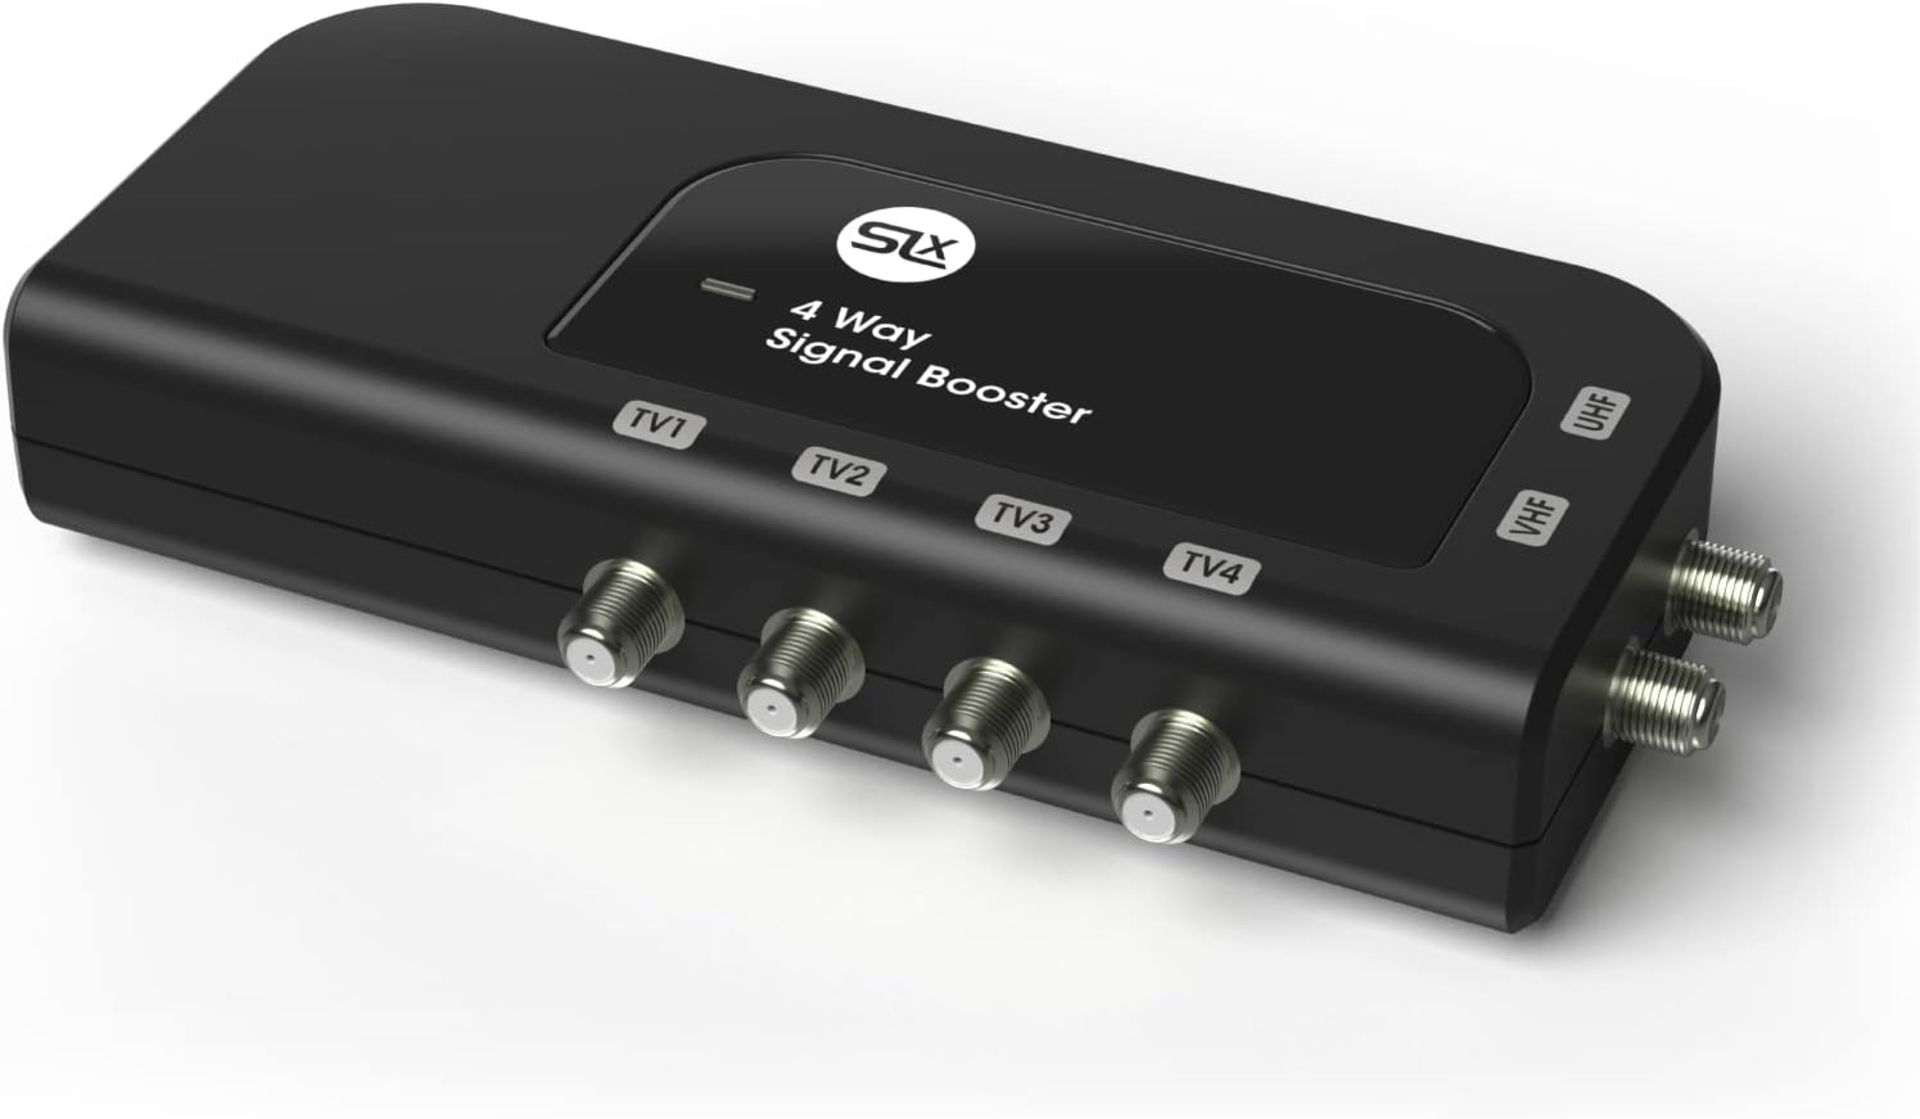 SLx TV Signal Booster Aerial Amplifier, 4 Way Signal Distribution Amplifier with F-Type Connections,